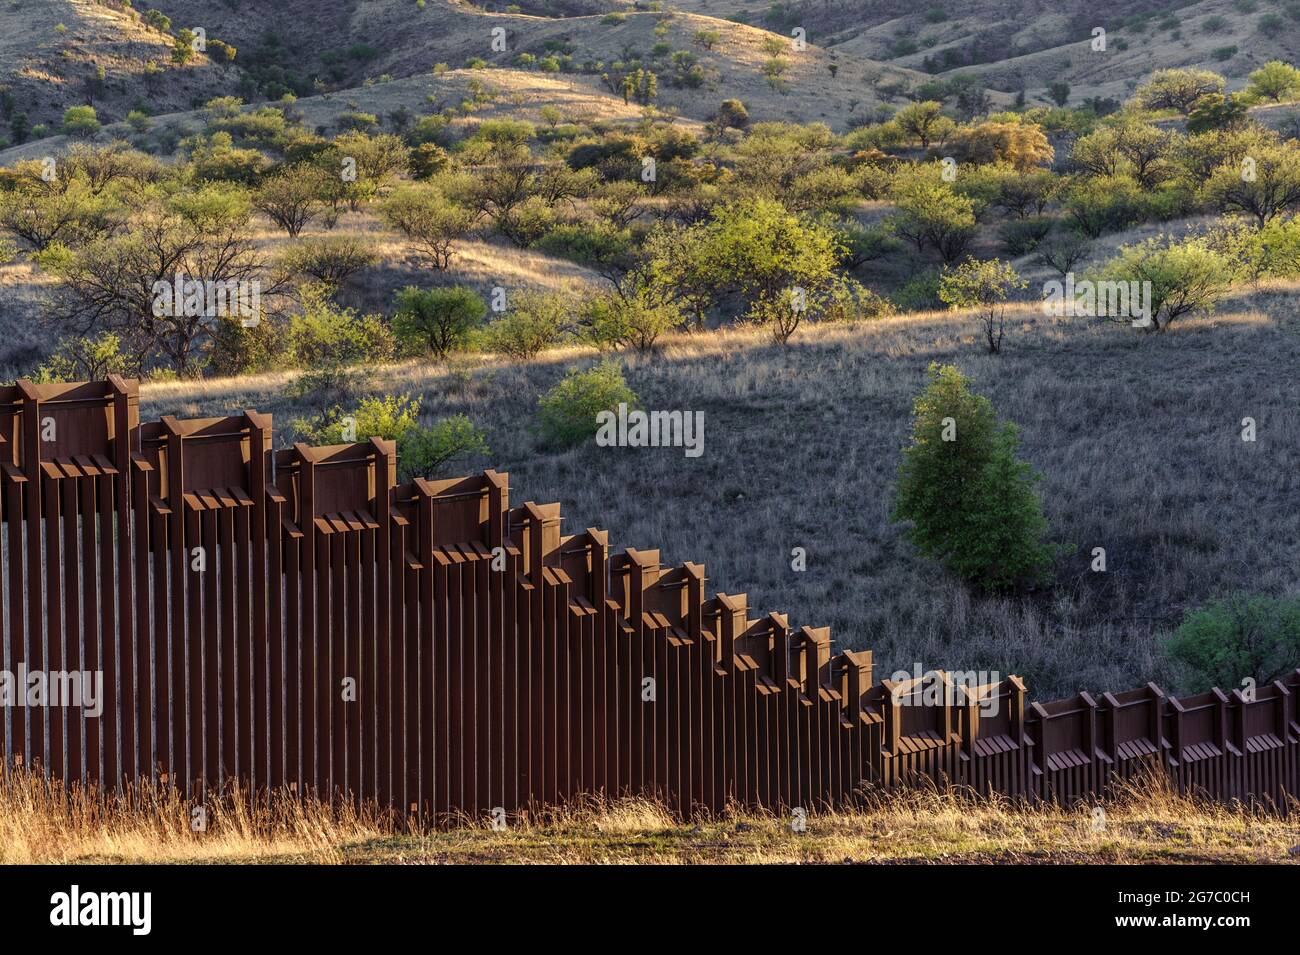 Image shows US border fence on the Mexico border, east of Nogales Arizona and Nogales Sonora Mexico, viewed from US side with typical vegetation domin Stock Photo